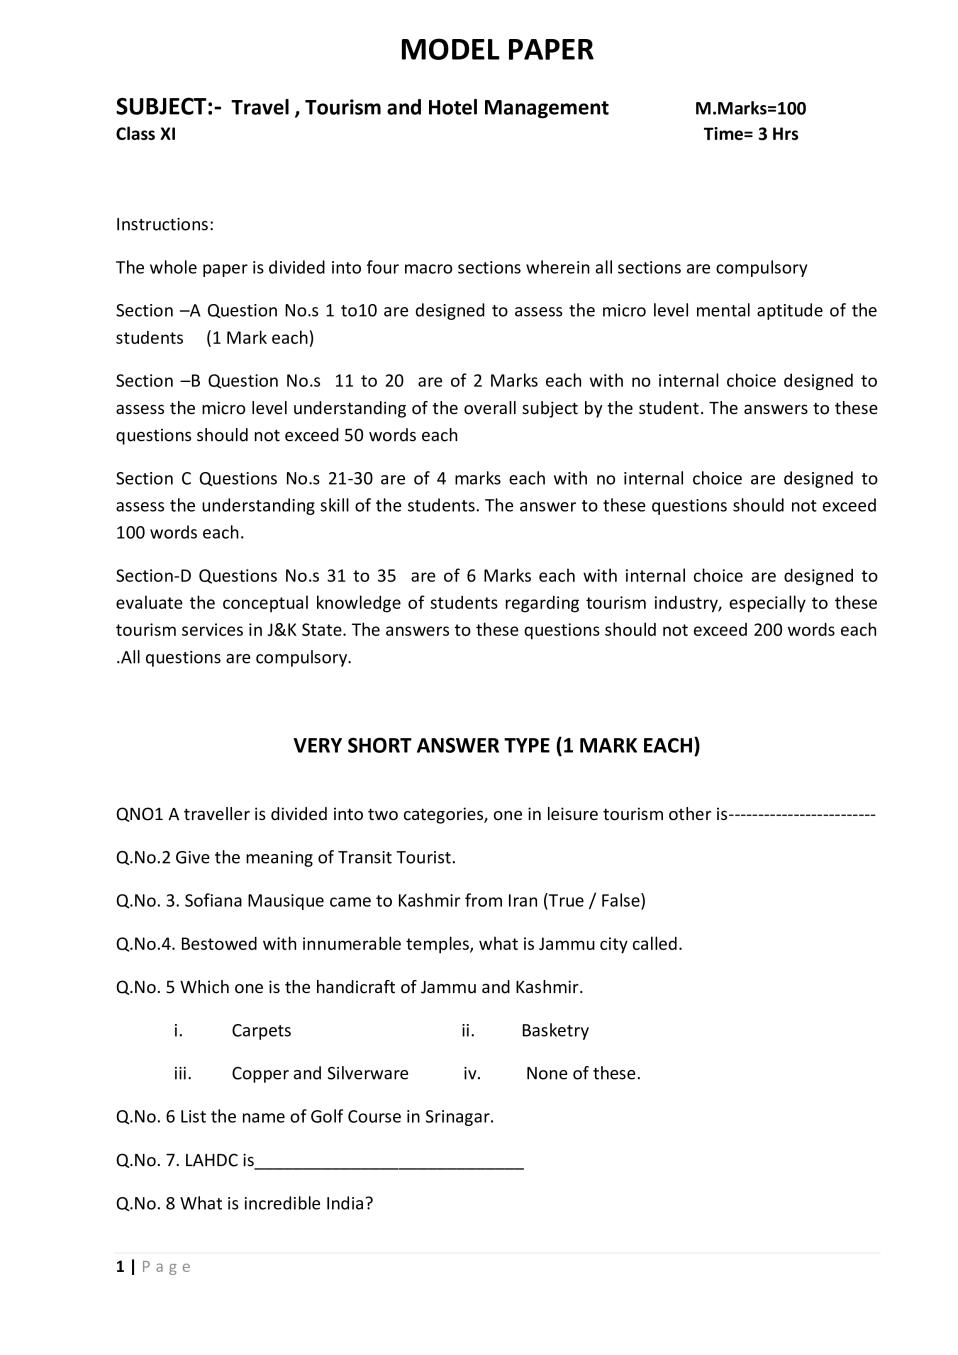 JKBOSE 11th Model Paper Travel and Tourism Management - Page 1